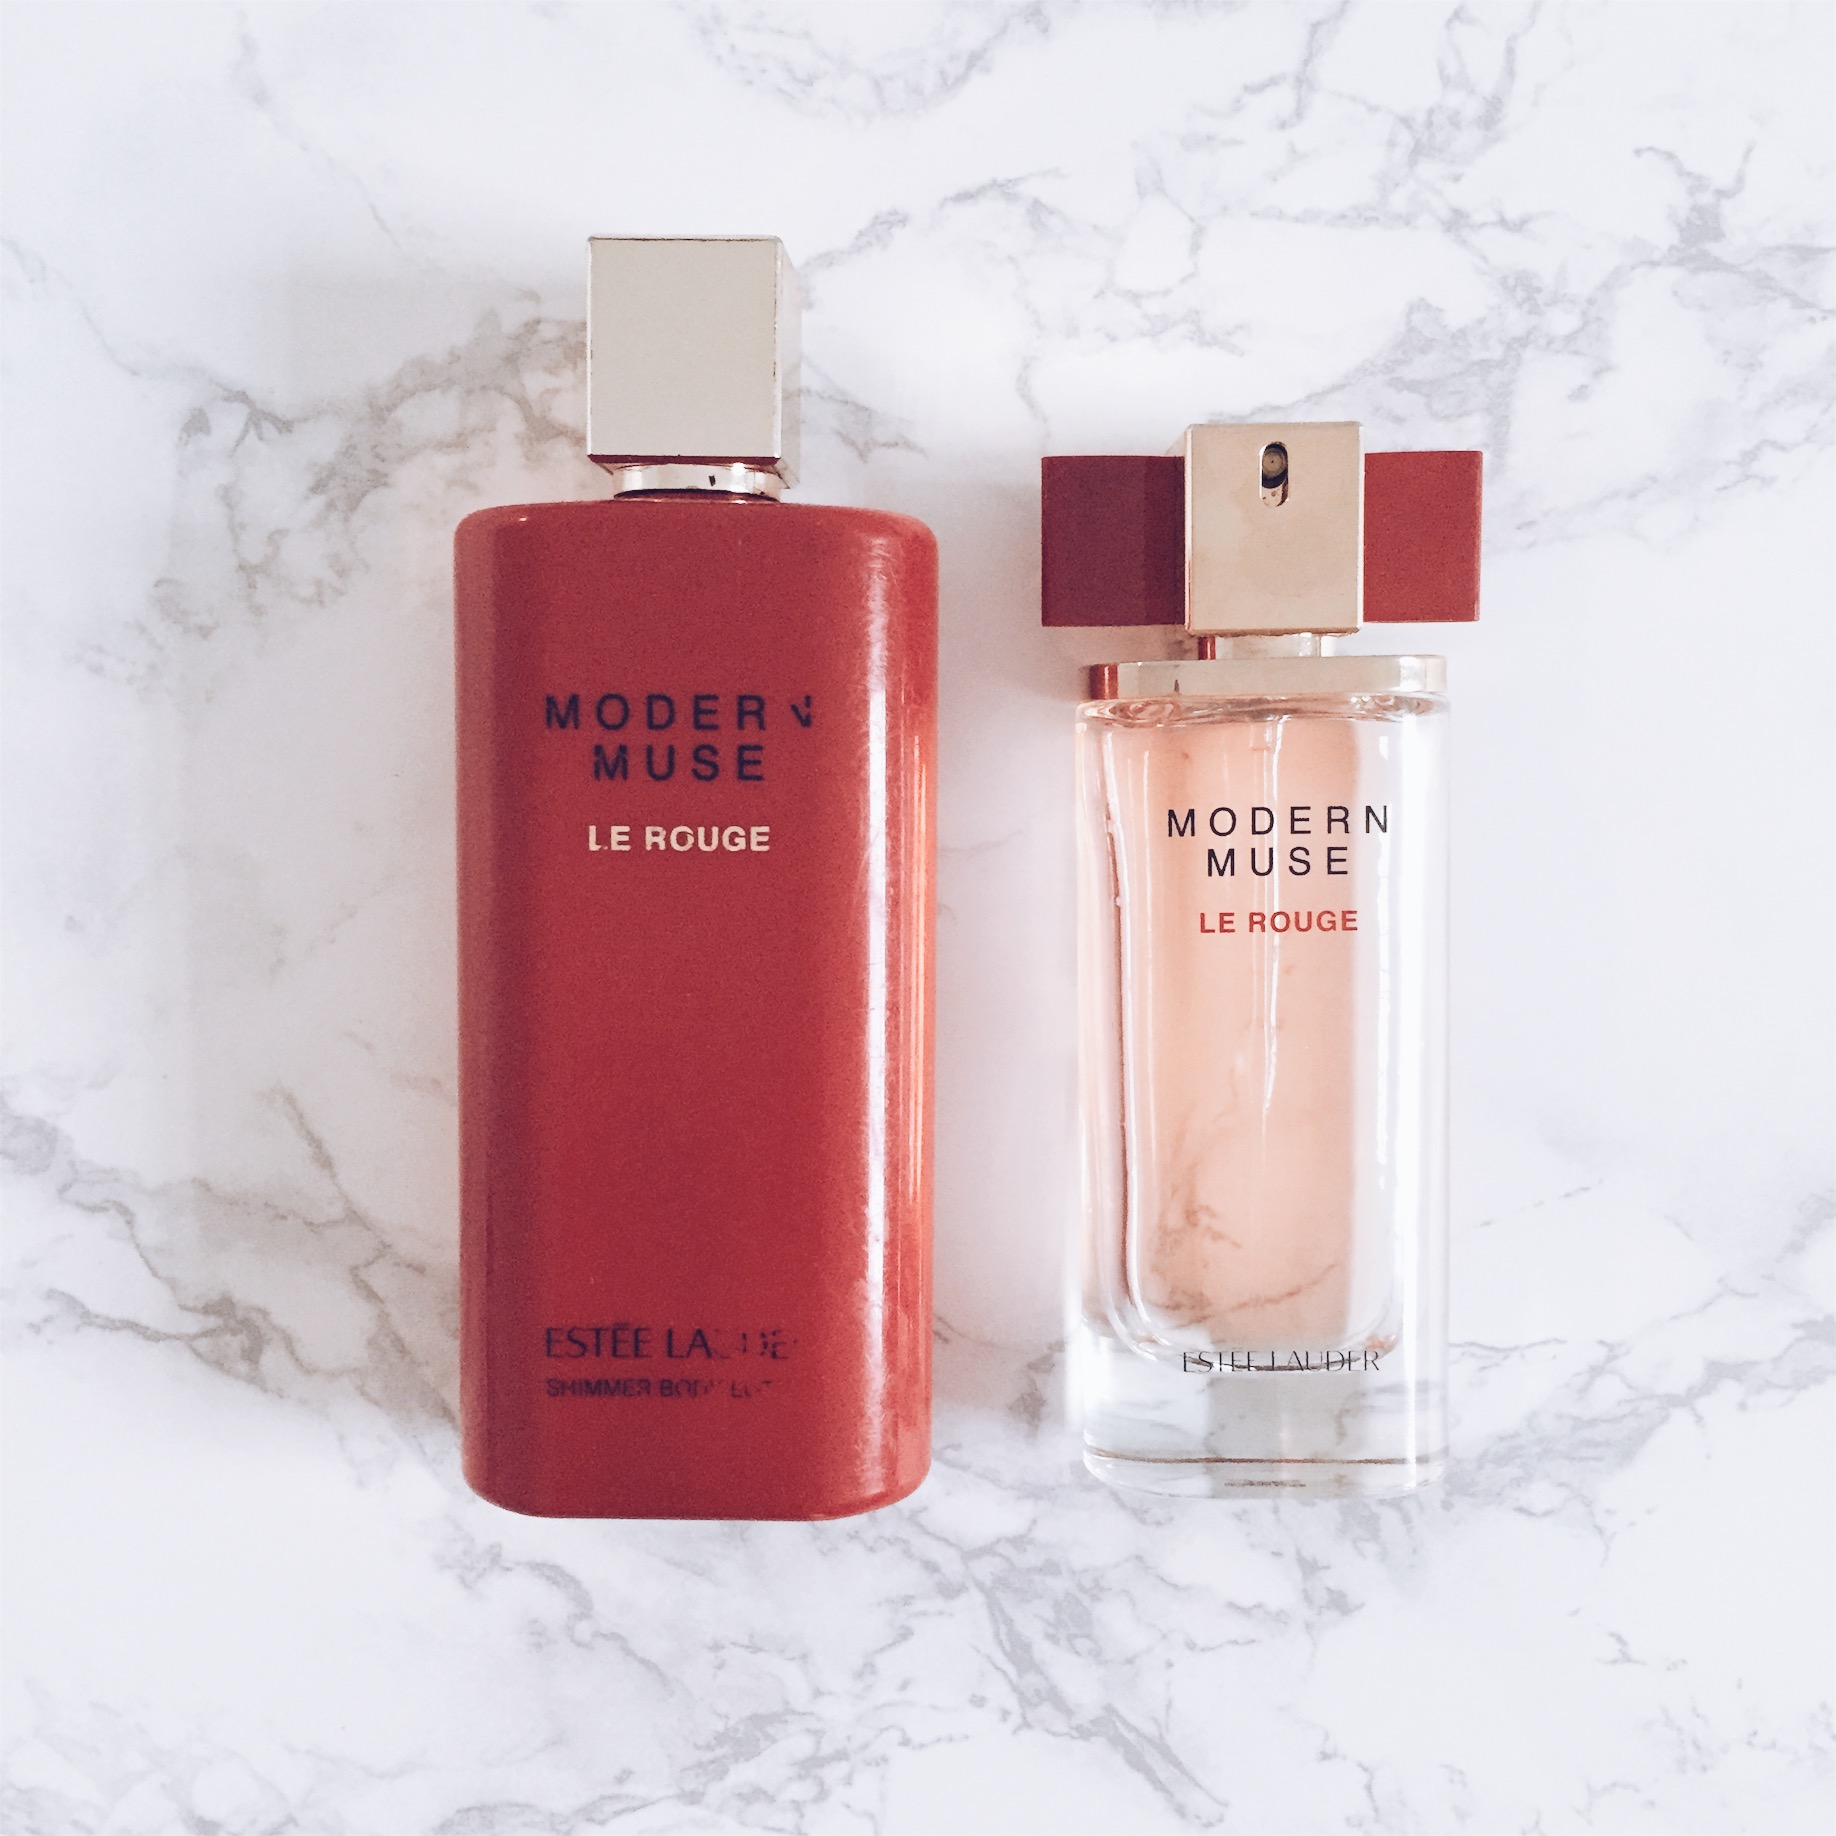 Modern Muse Le Rouge By Estee Lauder Perfume Review TIFF BENSON.